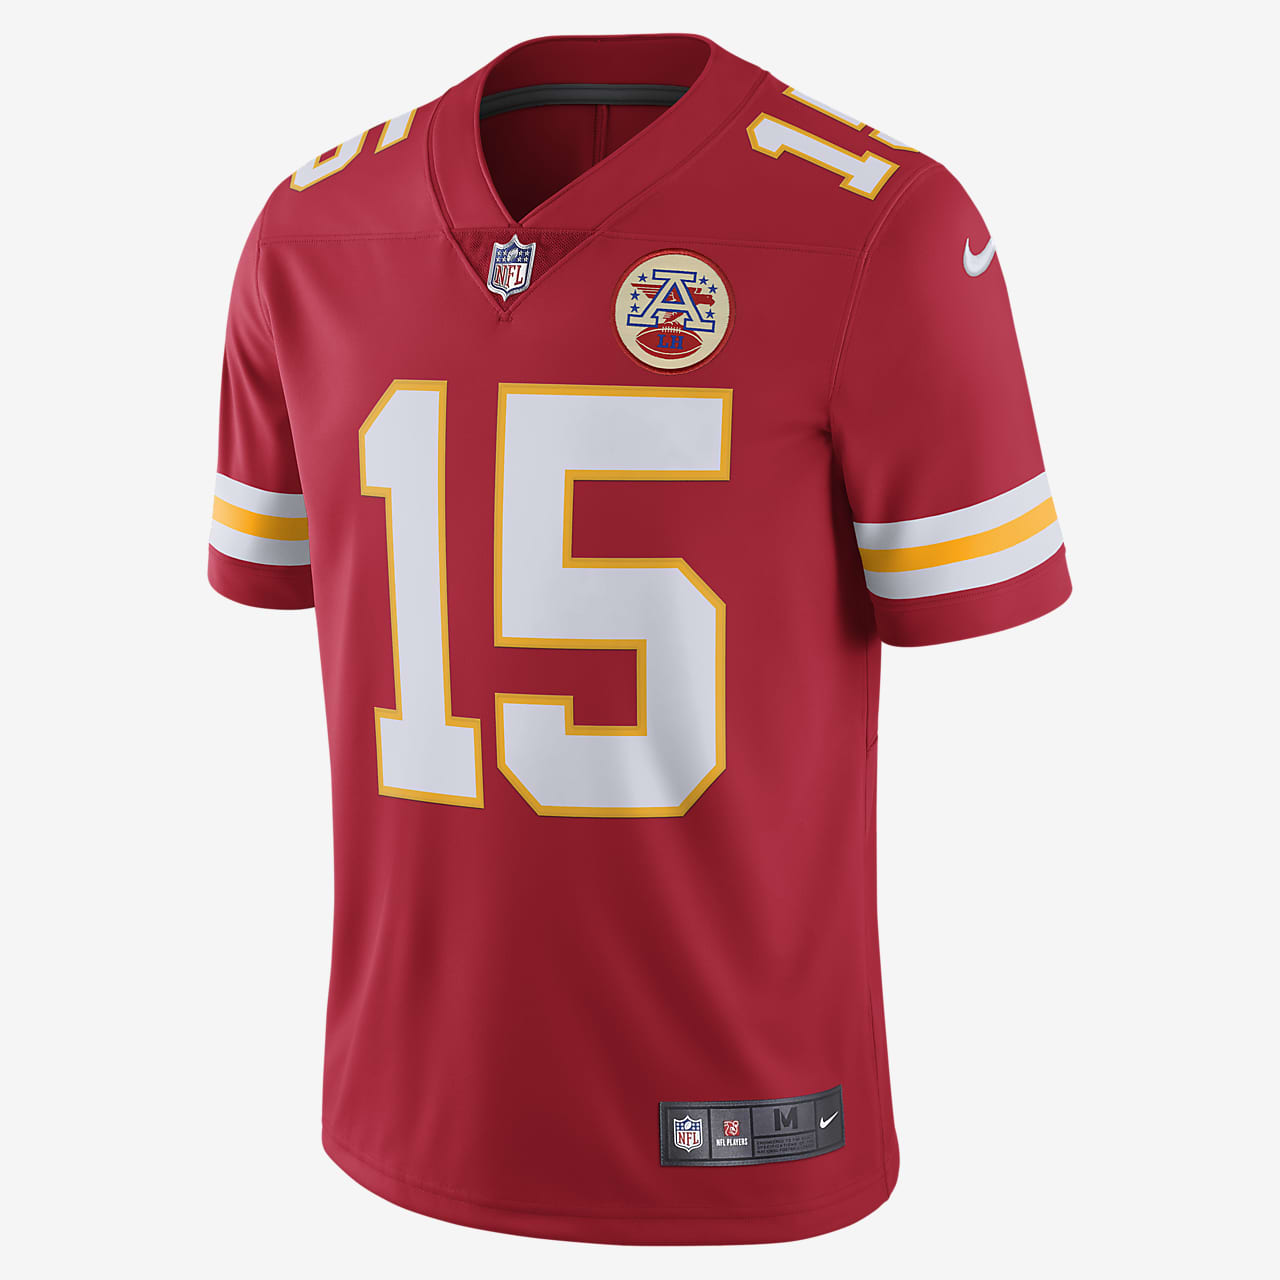 chiefs inverted jersey